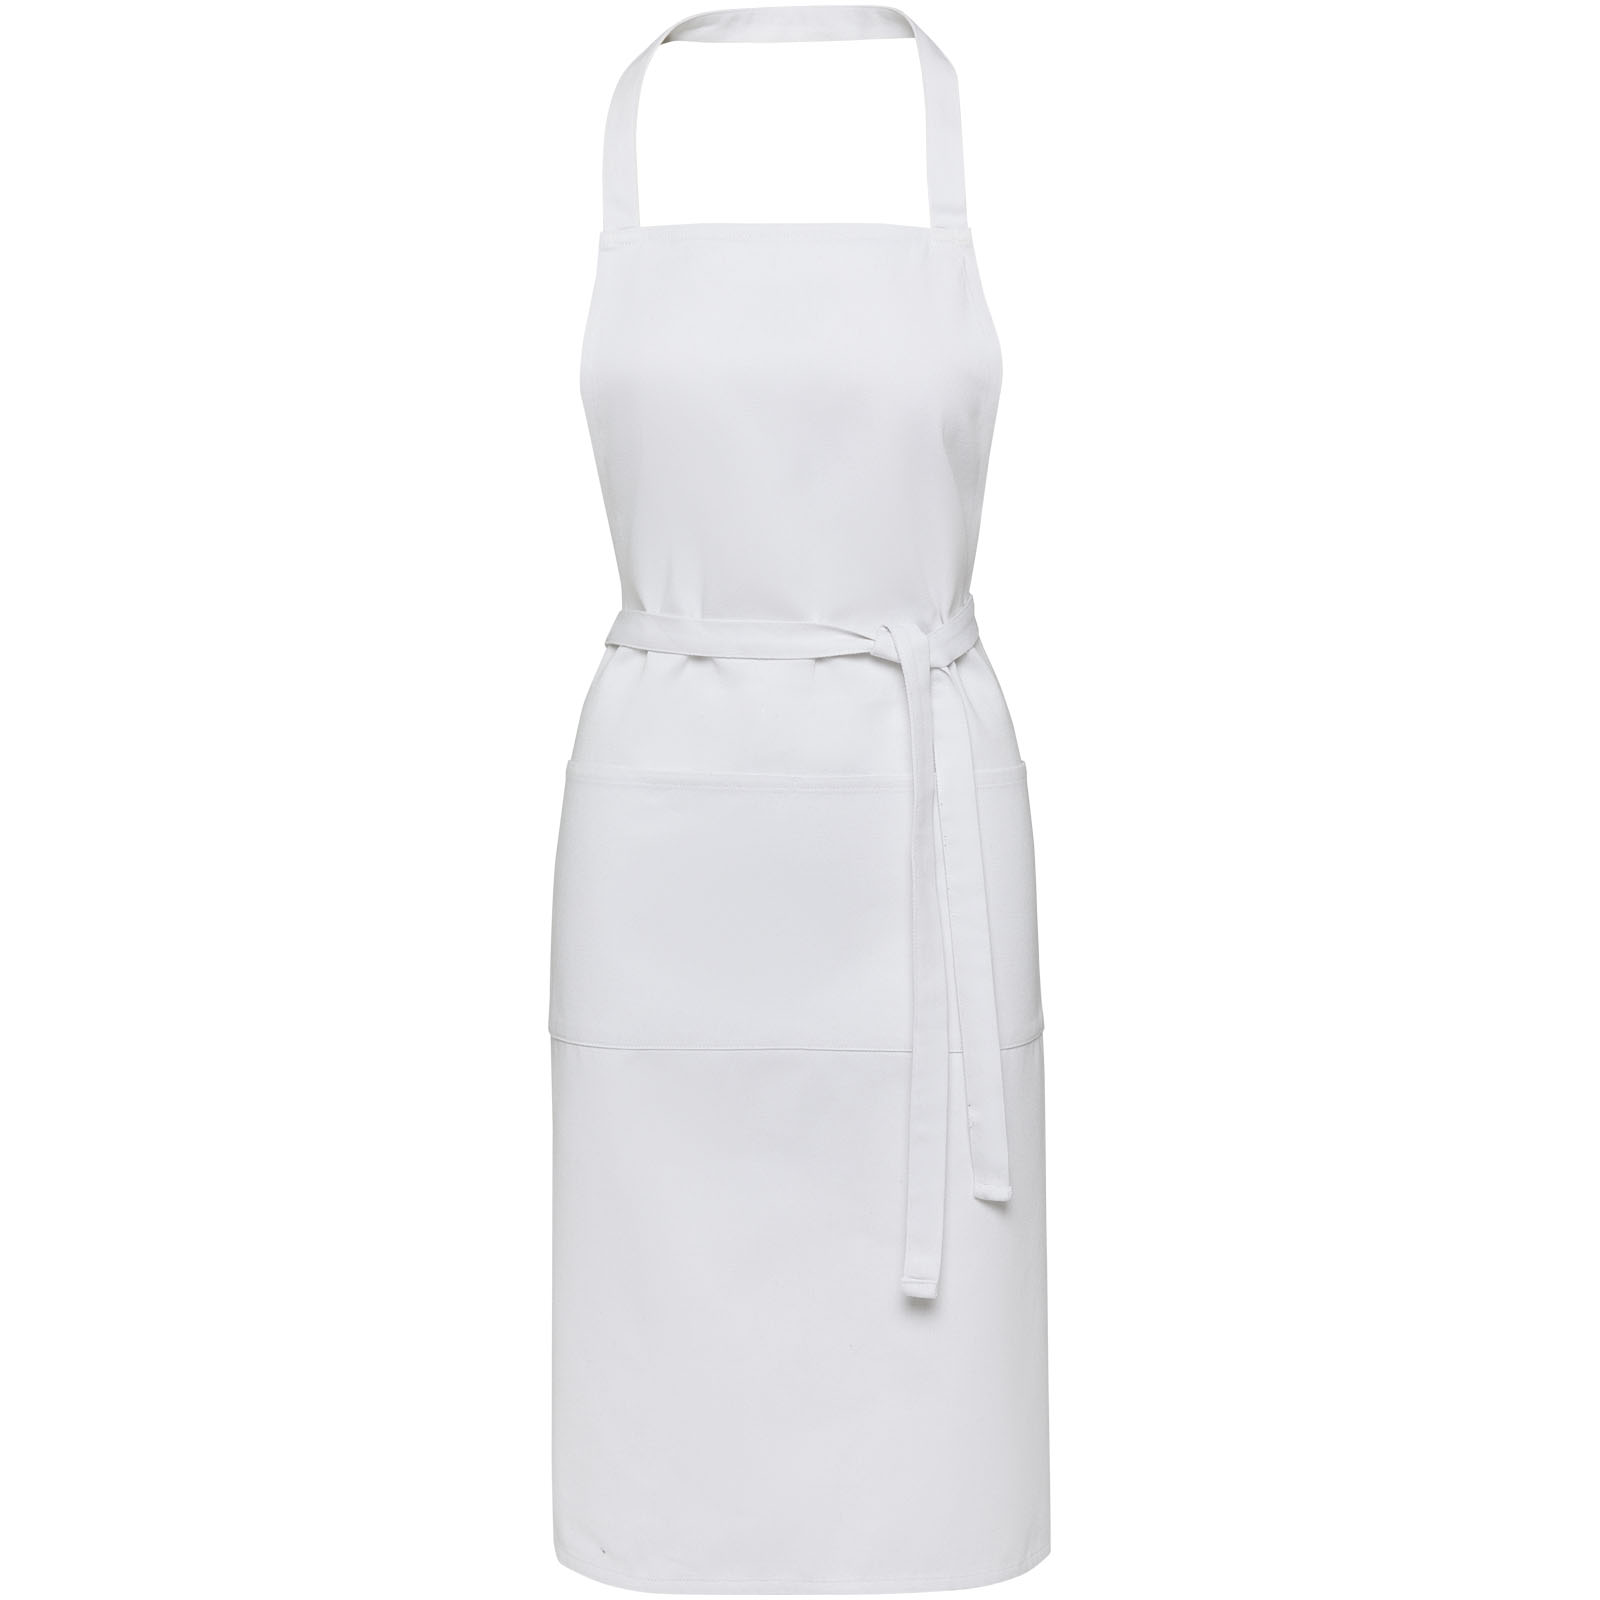 Home & Kitchen - Shara 240 g/m2 Aware™ recycled apron